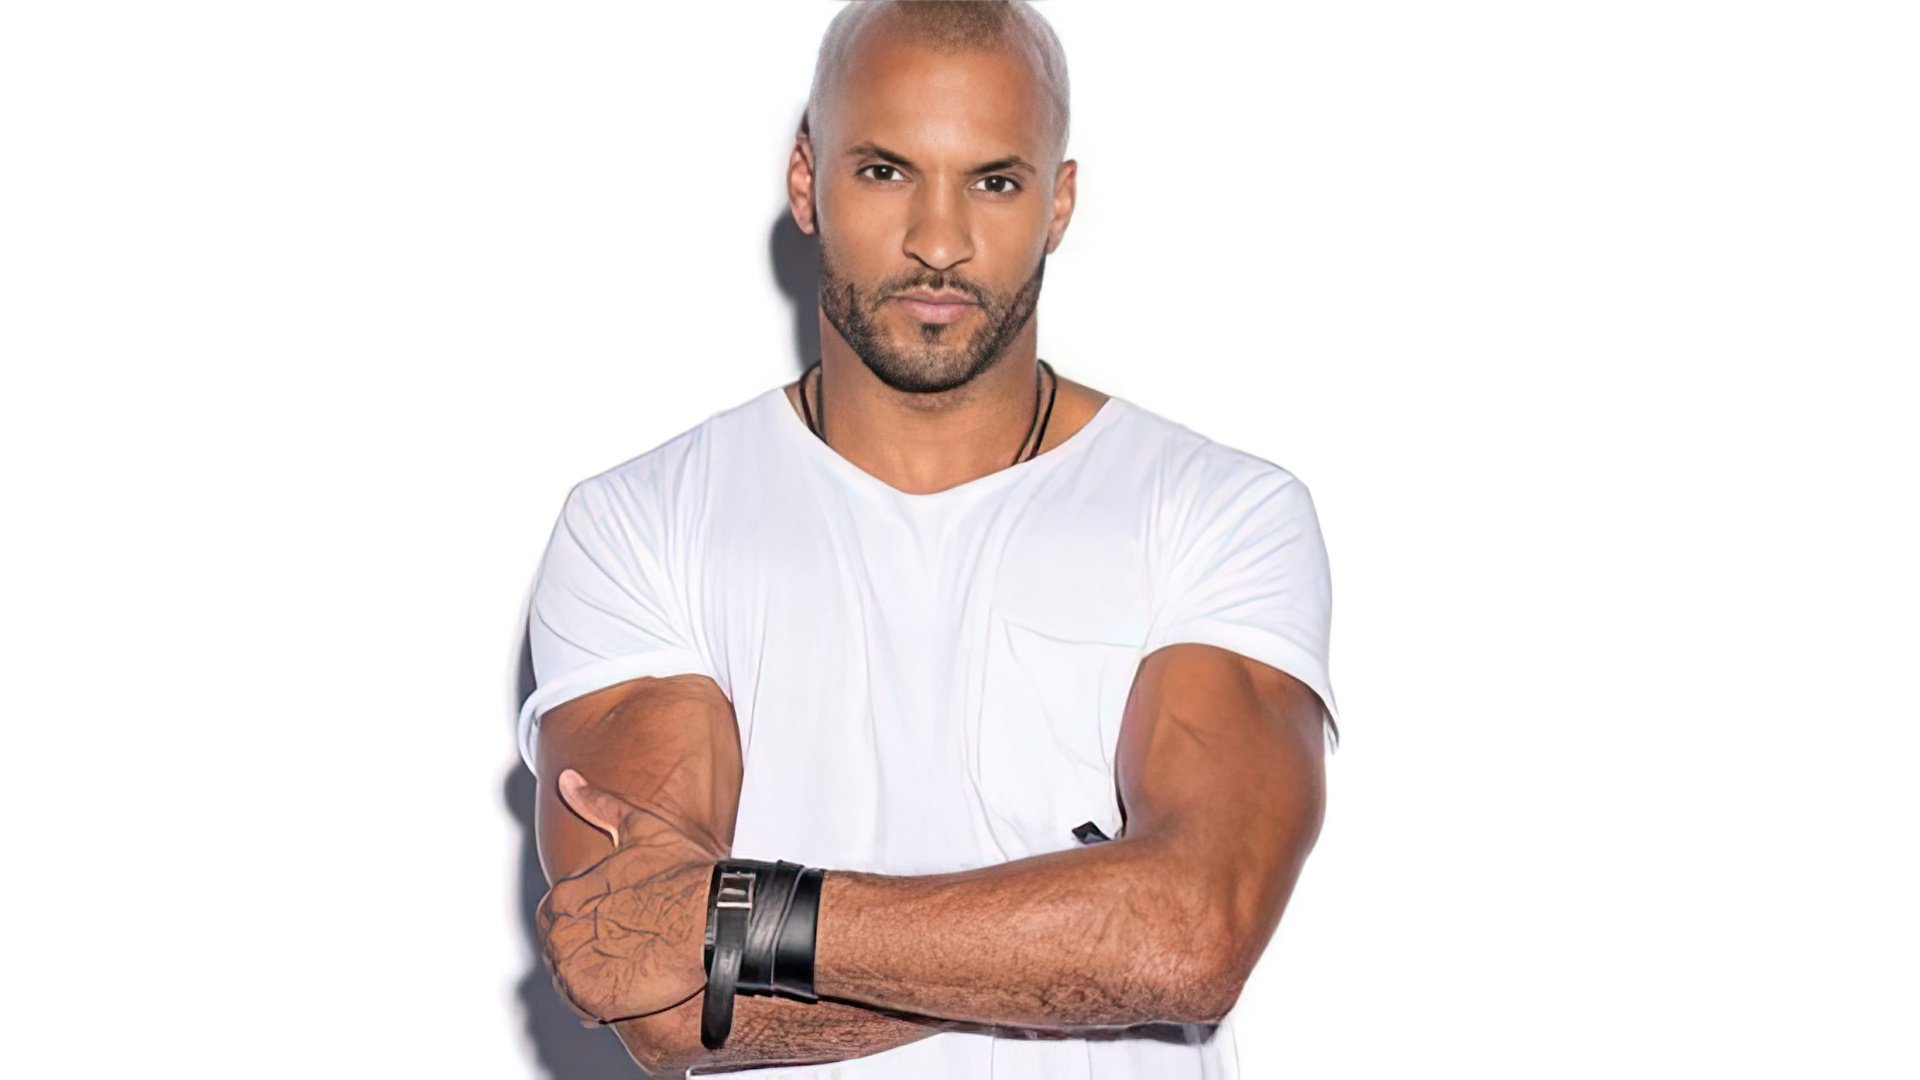 Ricky Whittle could have made a career in sports